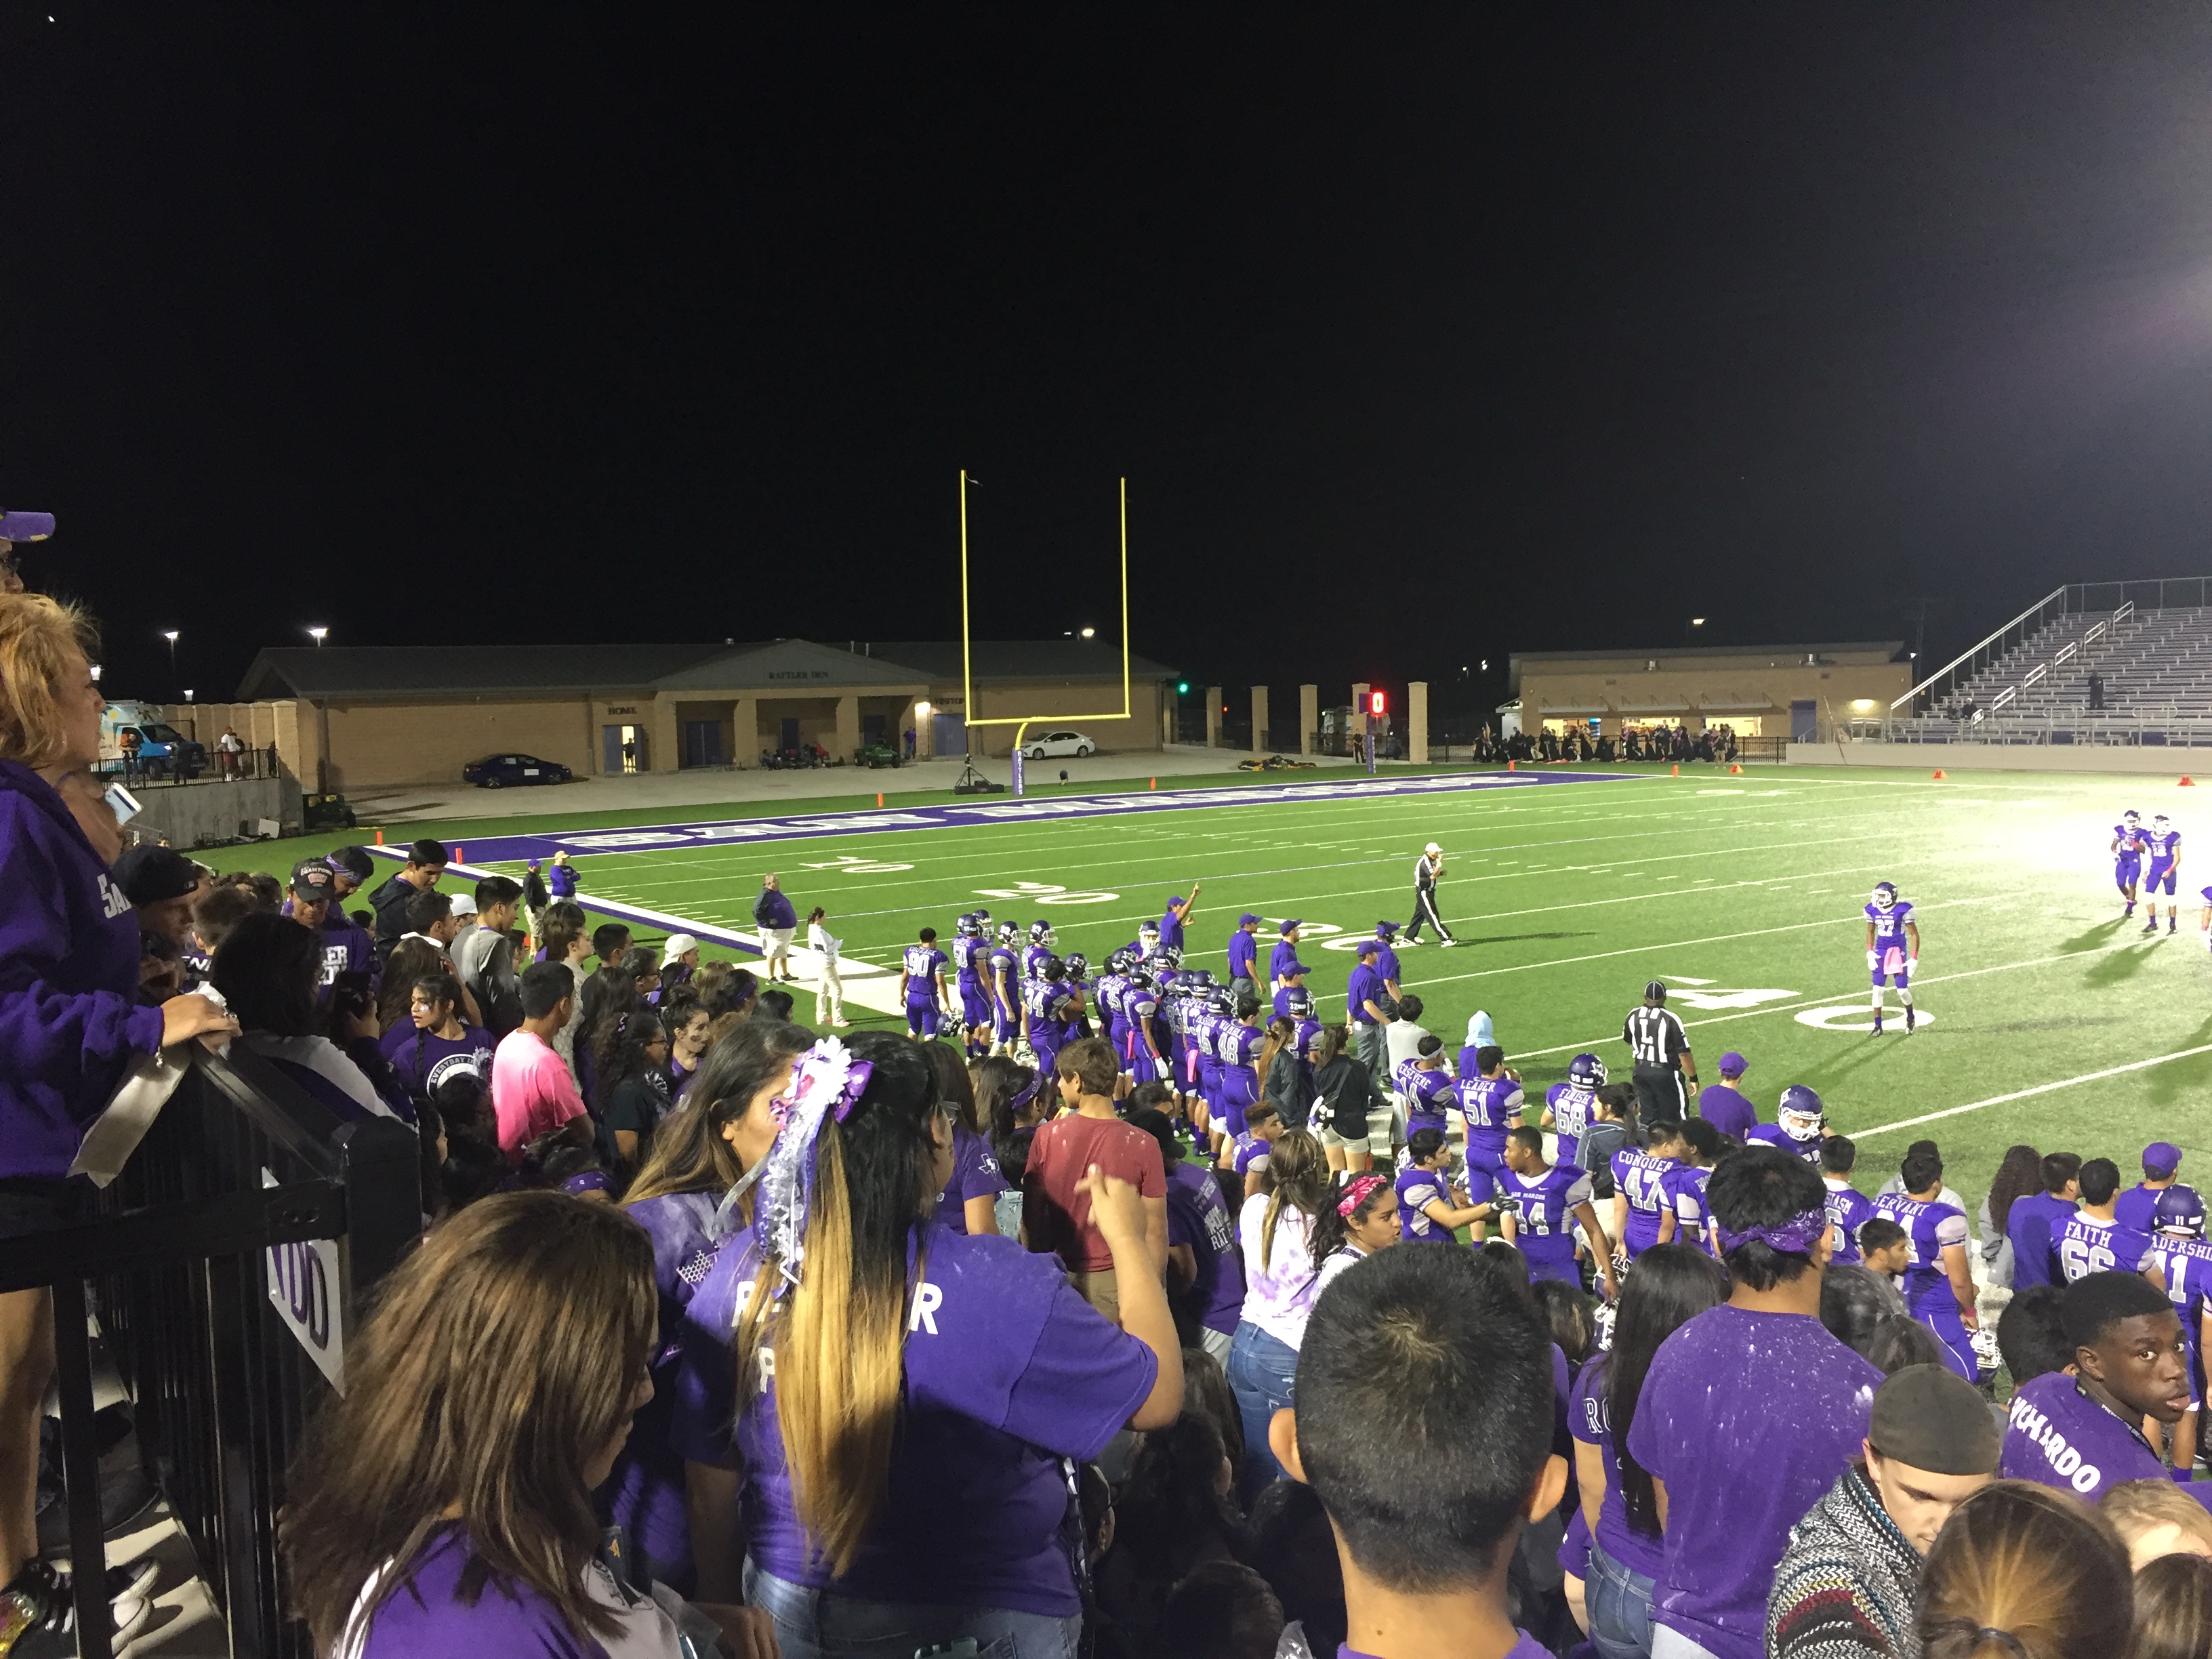 San Marcos High School beat Akins High School for their Homecoming game. Photo by Alex Gifford.